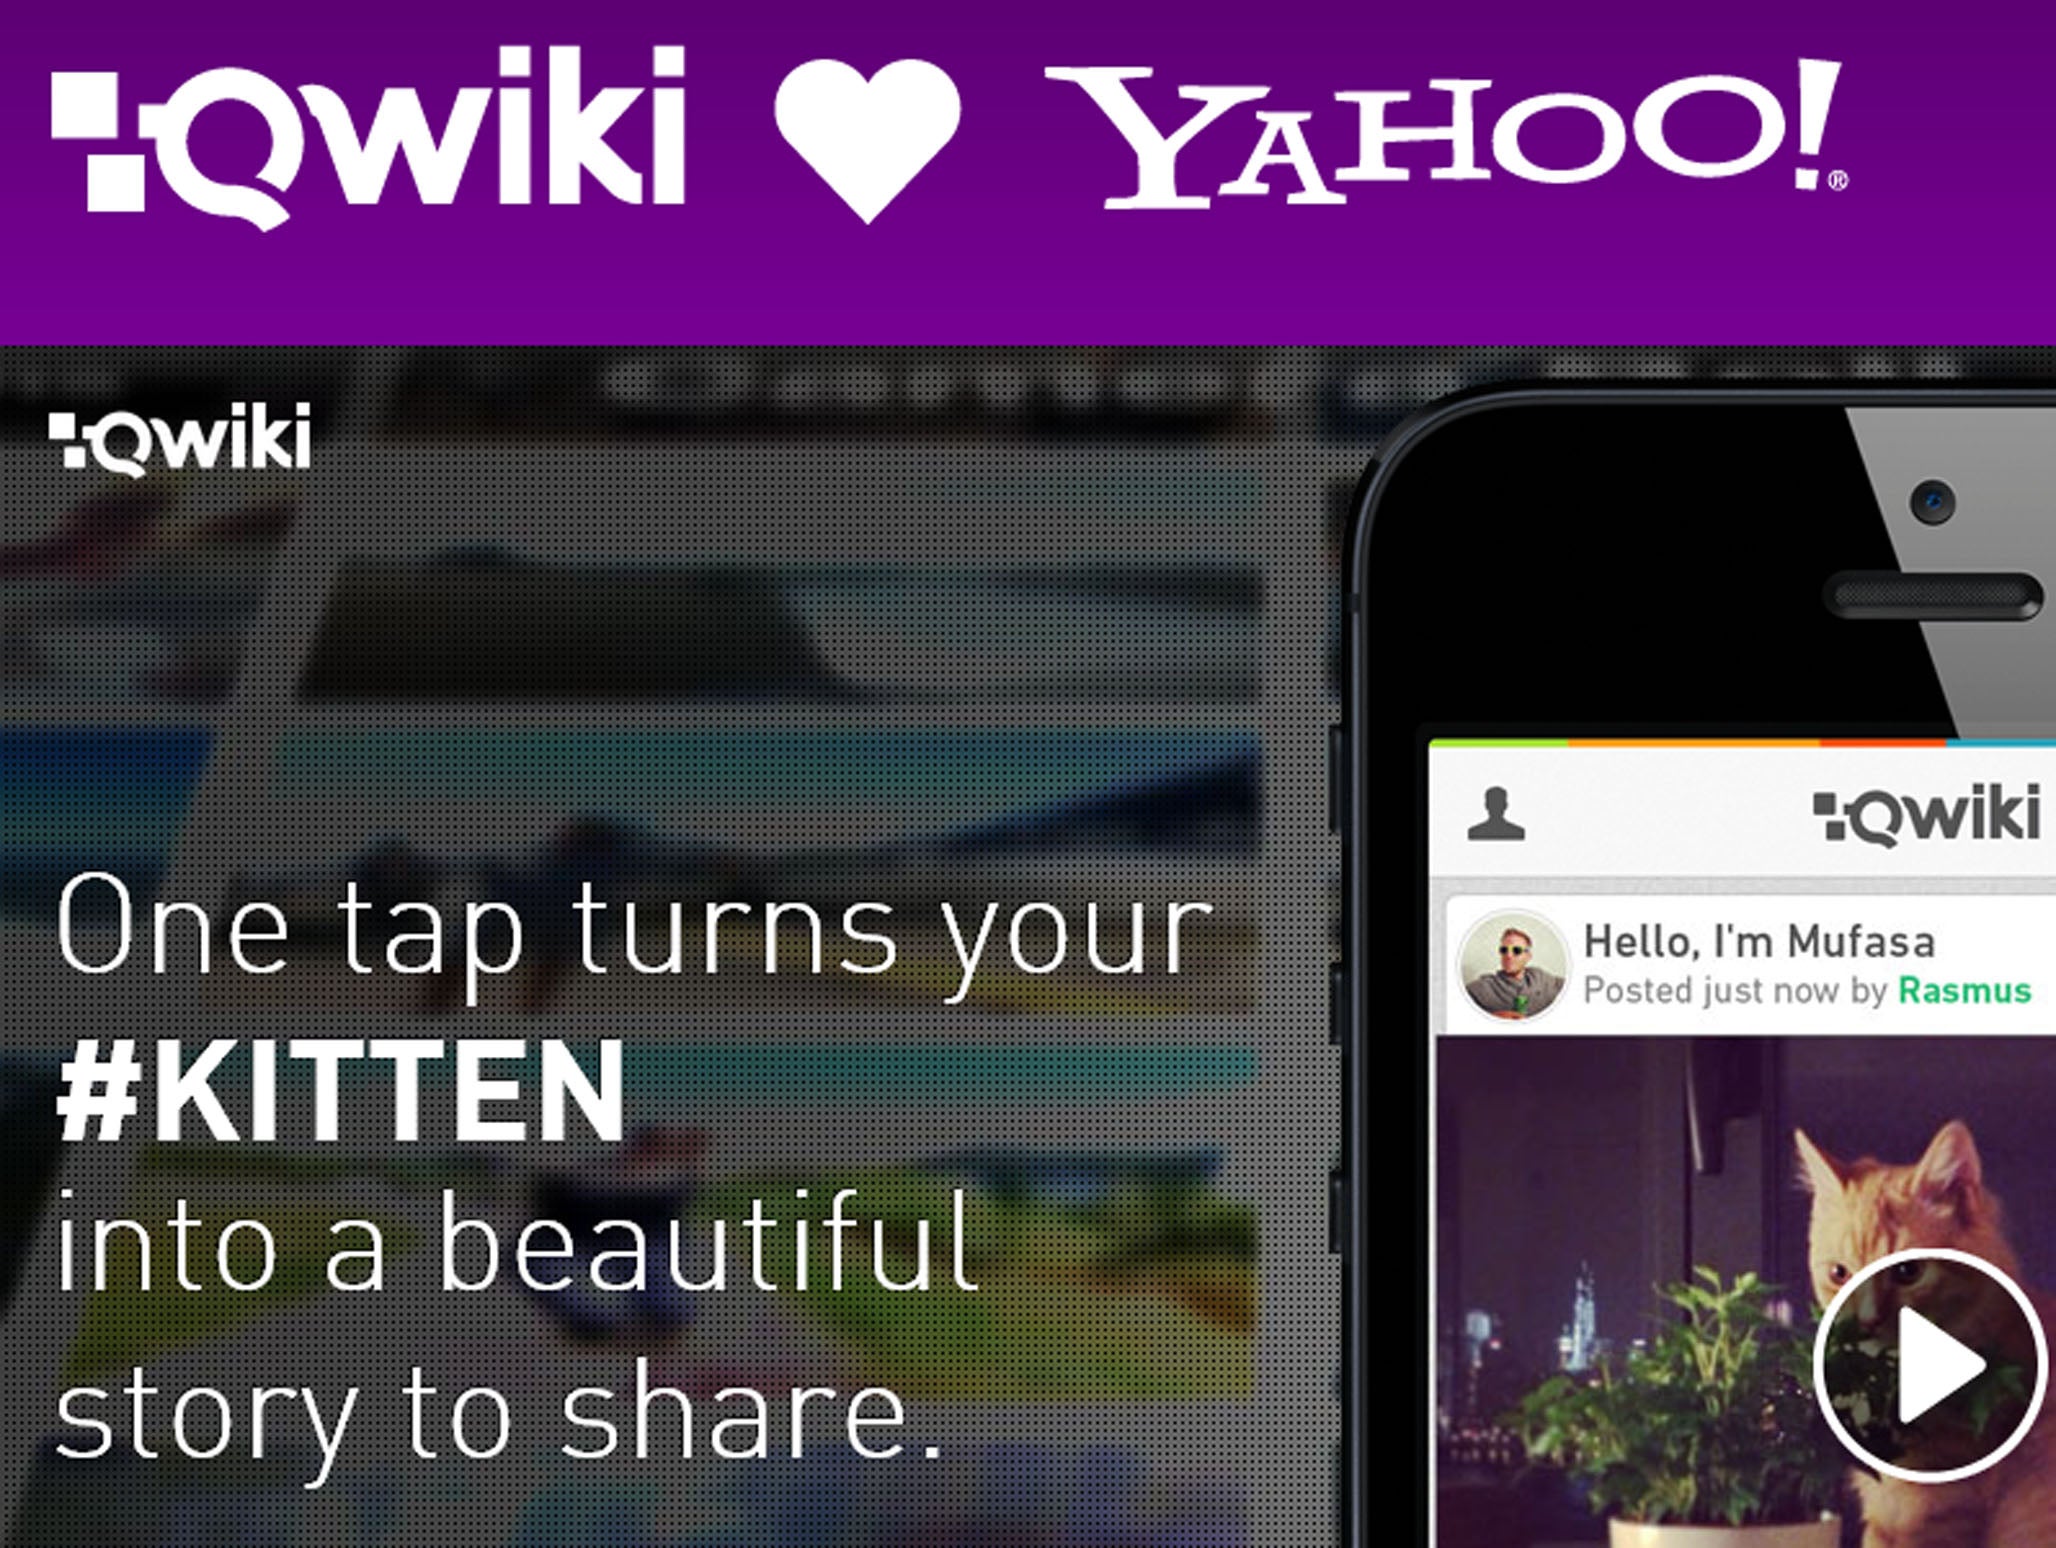 Qwiki is an app that complies video and audio from a user's phone to create video slideshows